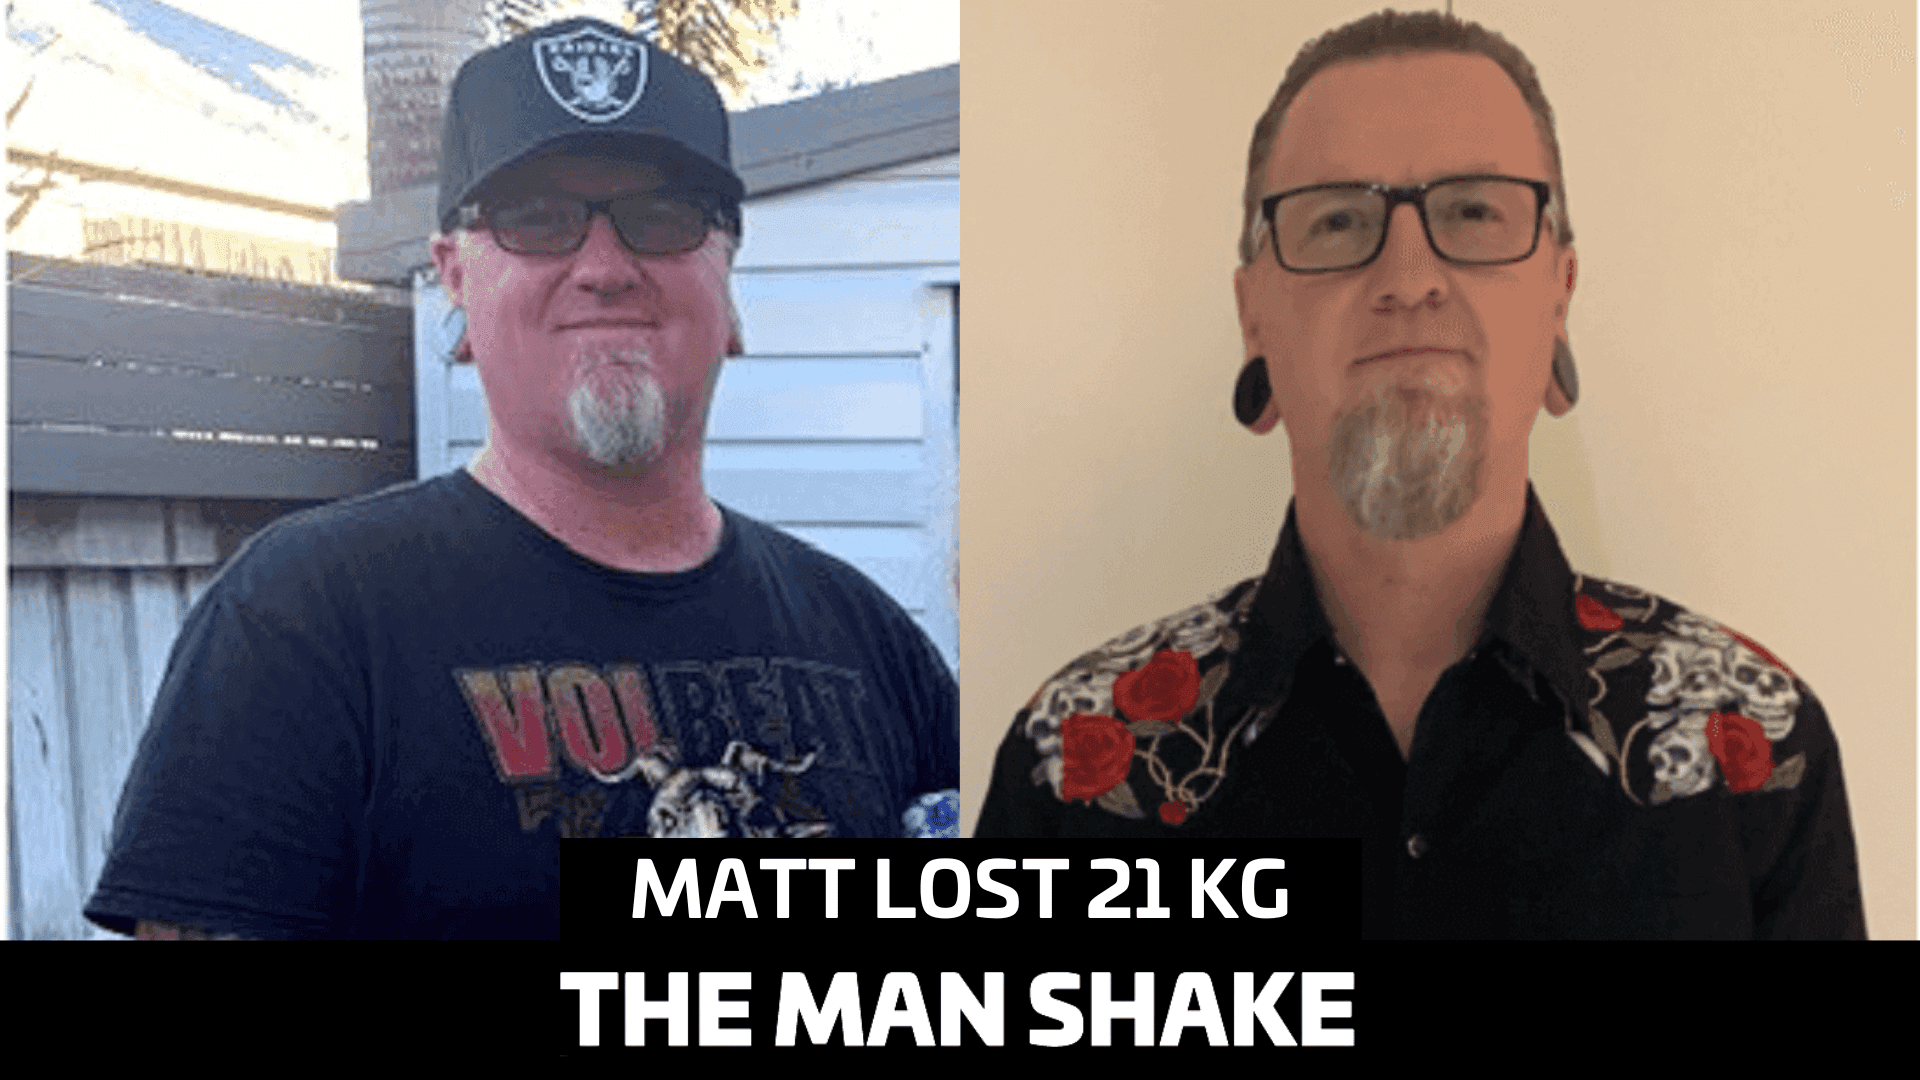 Matt took the first step and lost 21kg!